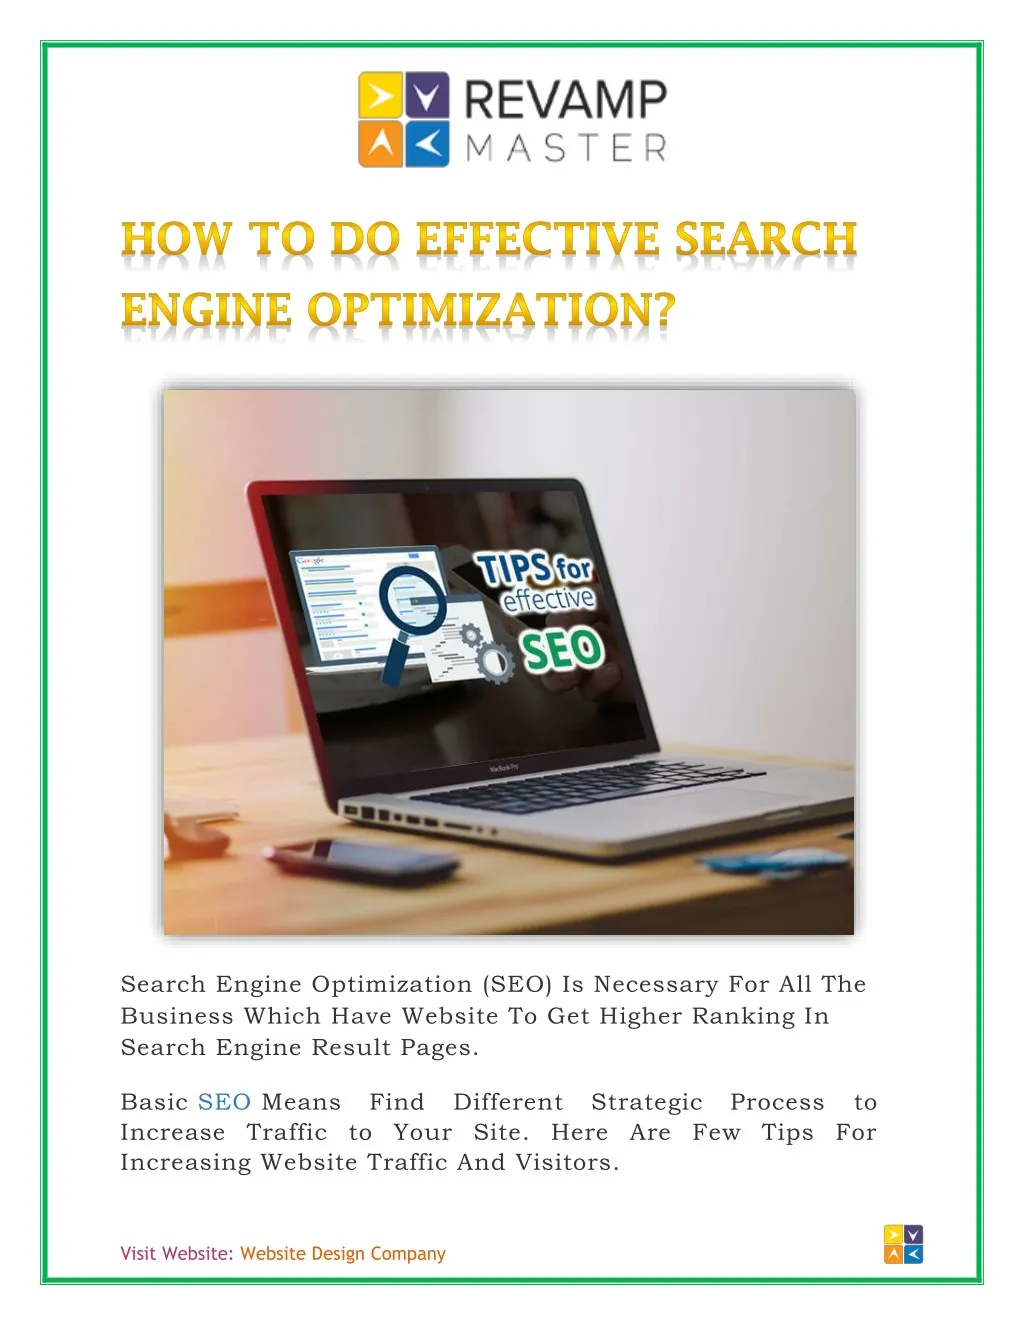 search engine optimization seo is necessary